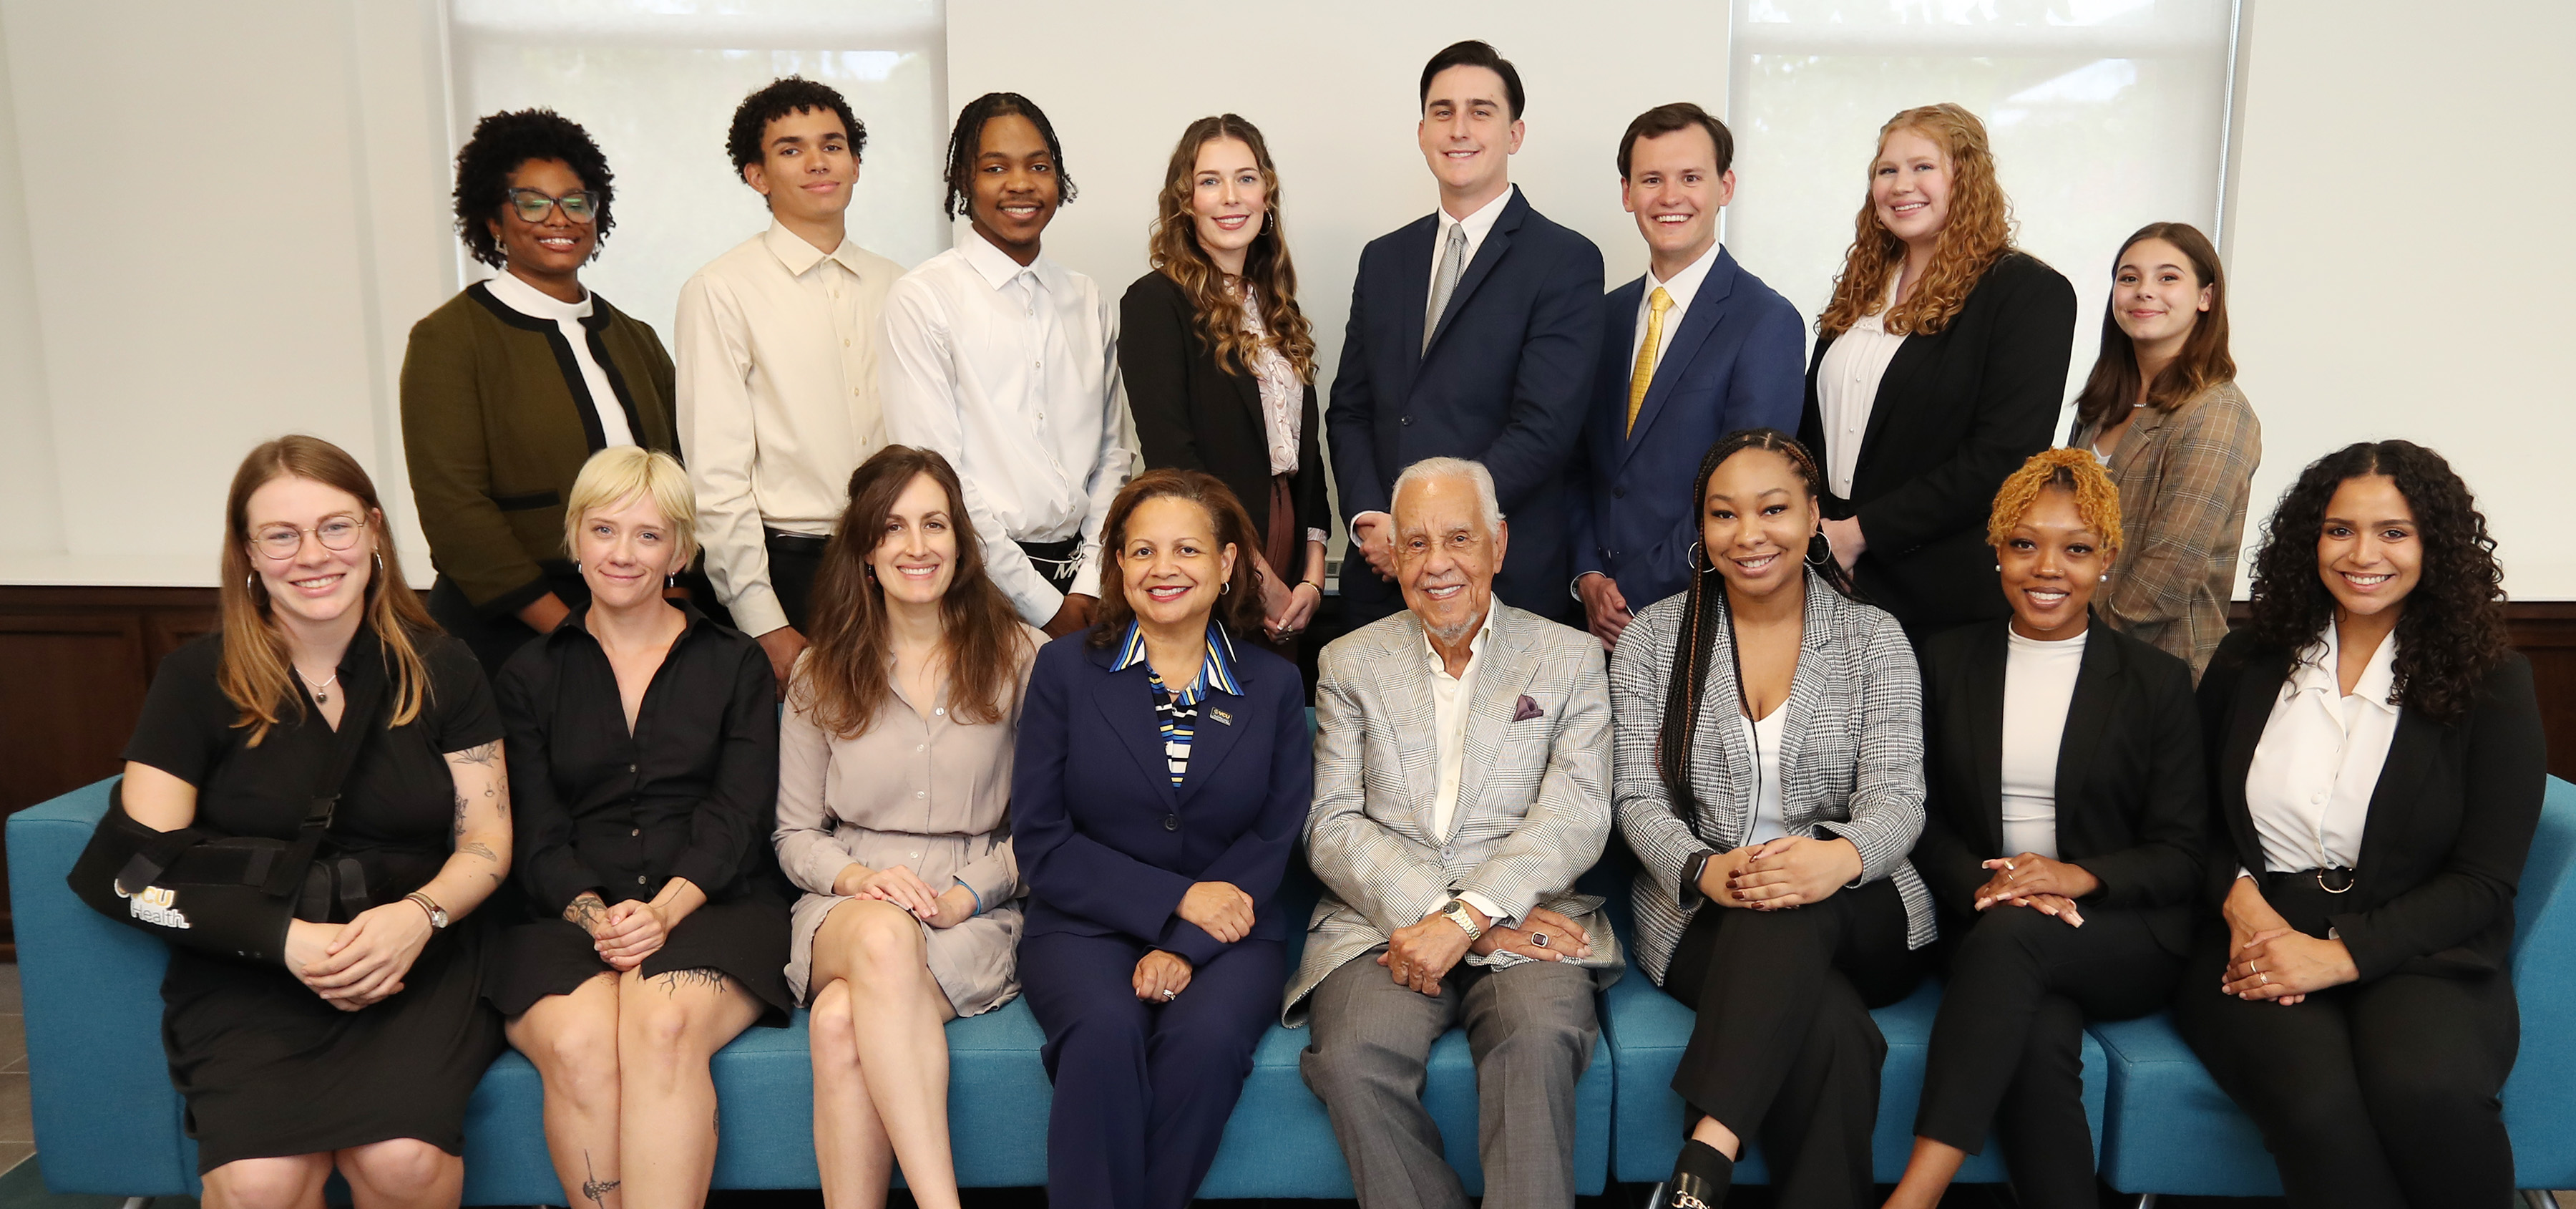 These talented graduate students are gaining career experiences with our partners: Capital Region Airport Commission, Dinwiddie County, HOME of VA, Virginia Dept. of Corrections, VCU Center for Public Policy, VCU RVA Eviction Lab, and the Greater Richmond Transit Company. Here's to a great year of research and public service.